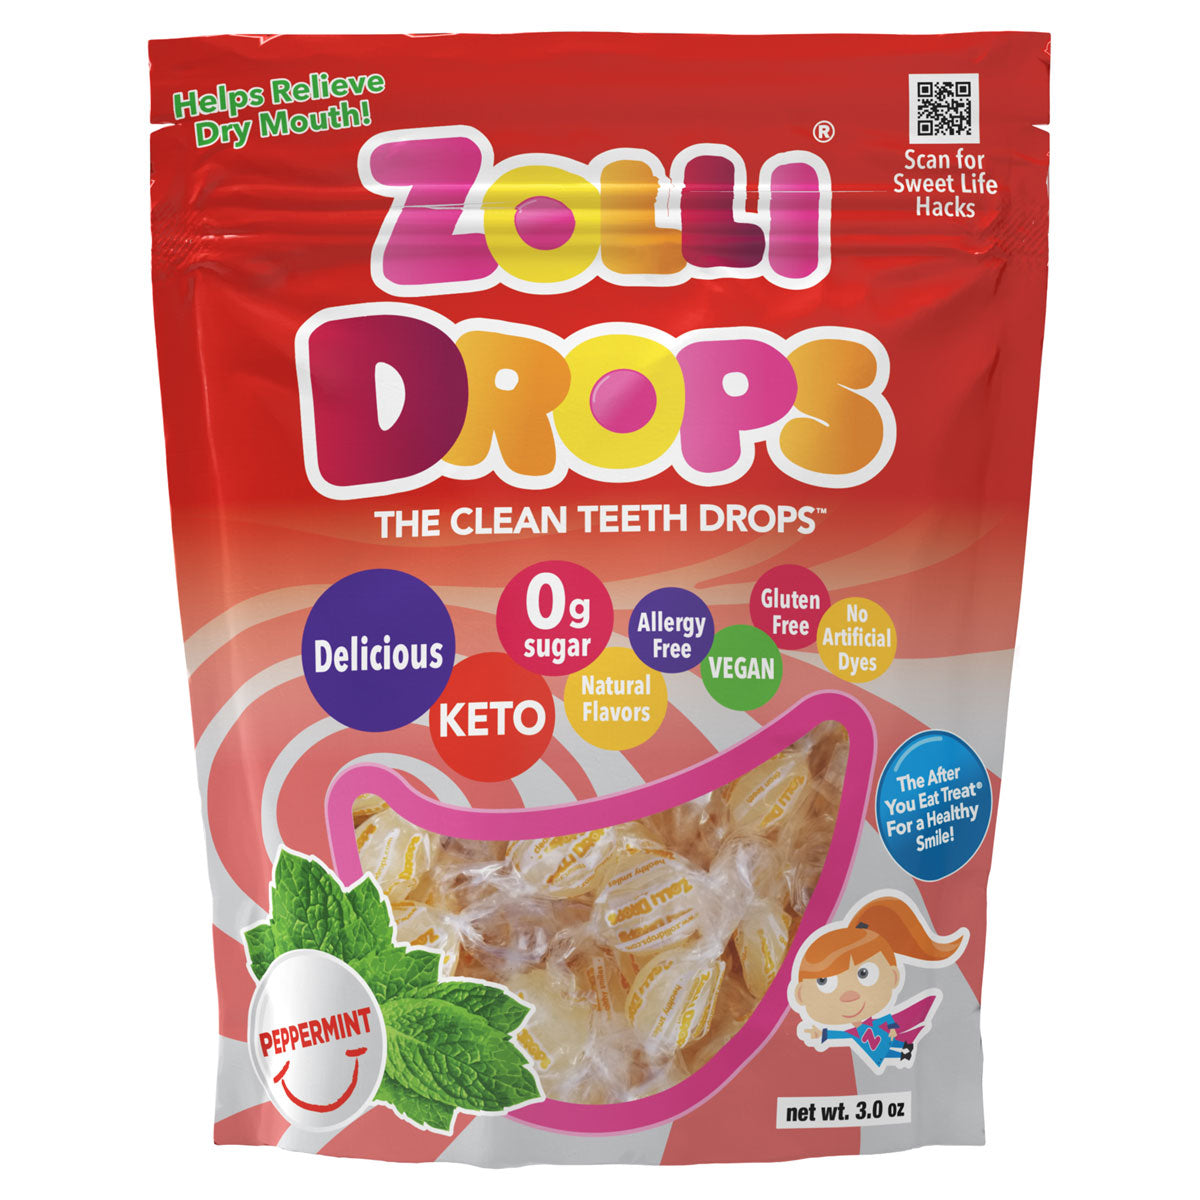 Zolli Drops have 0 grams of sugar, 0 grams of net carbs, are vegan, dairy free, soy free, non GMO, no artificial dyes, kosher, and have natural flavors.